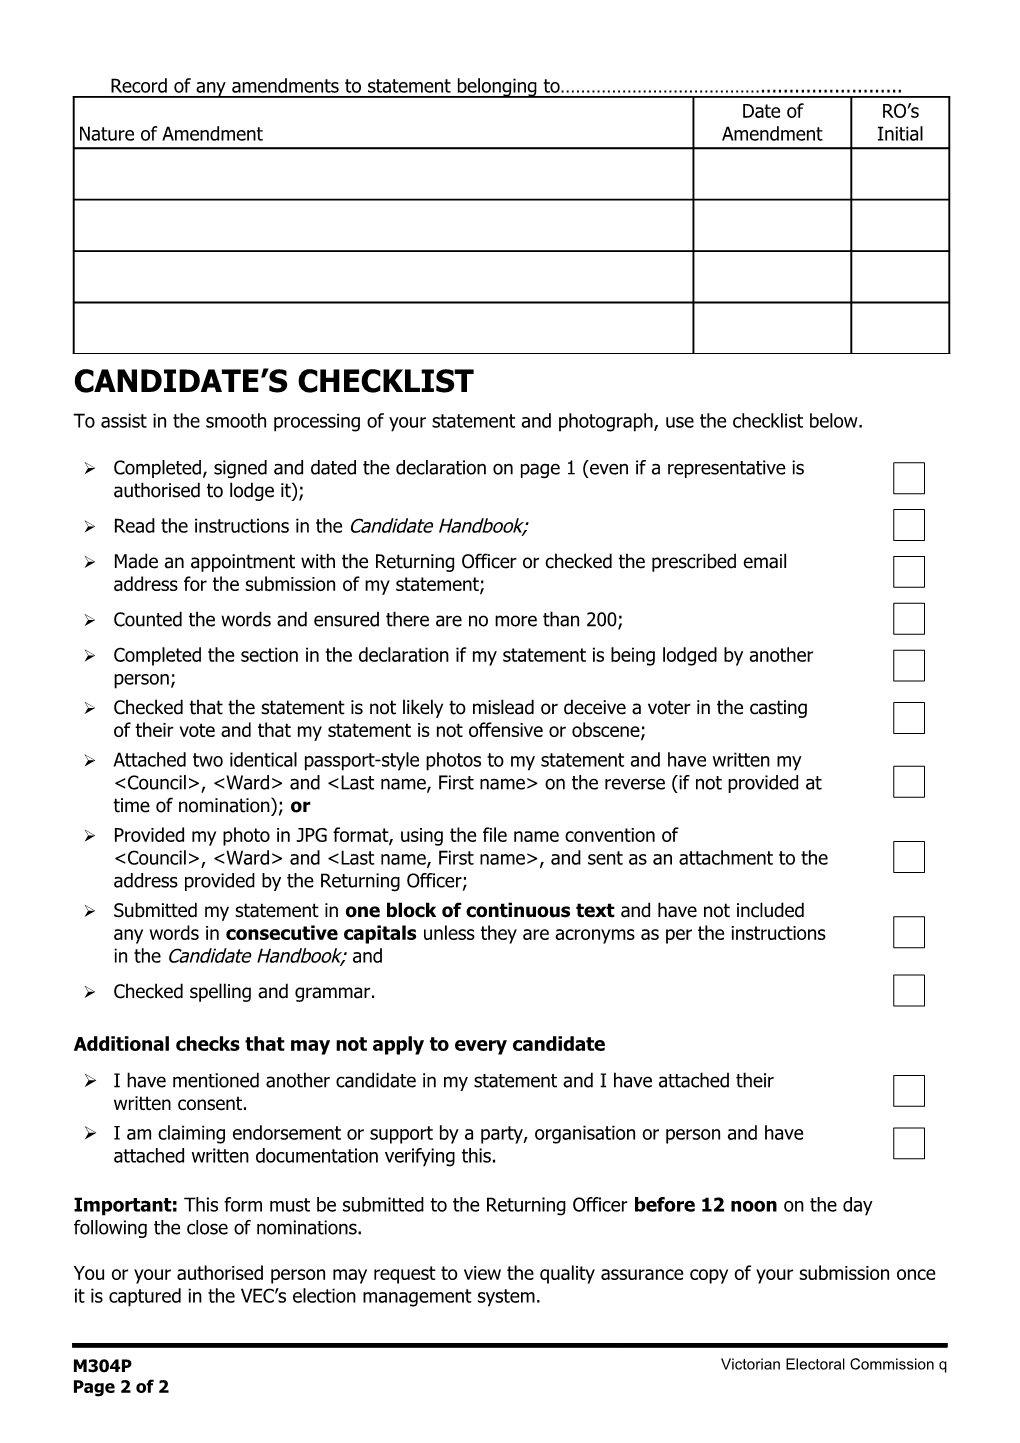 All Details on Submitting Your Personal Statement Are Detailed in the Candidate Handbook.It